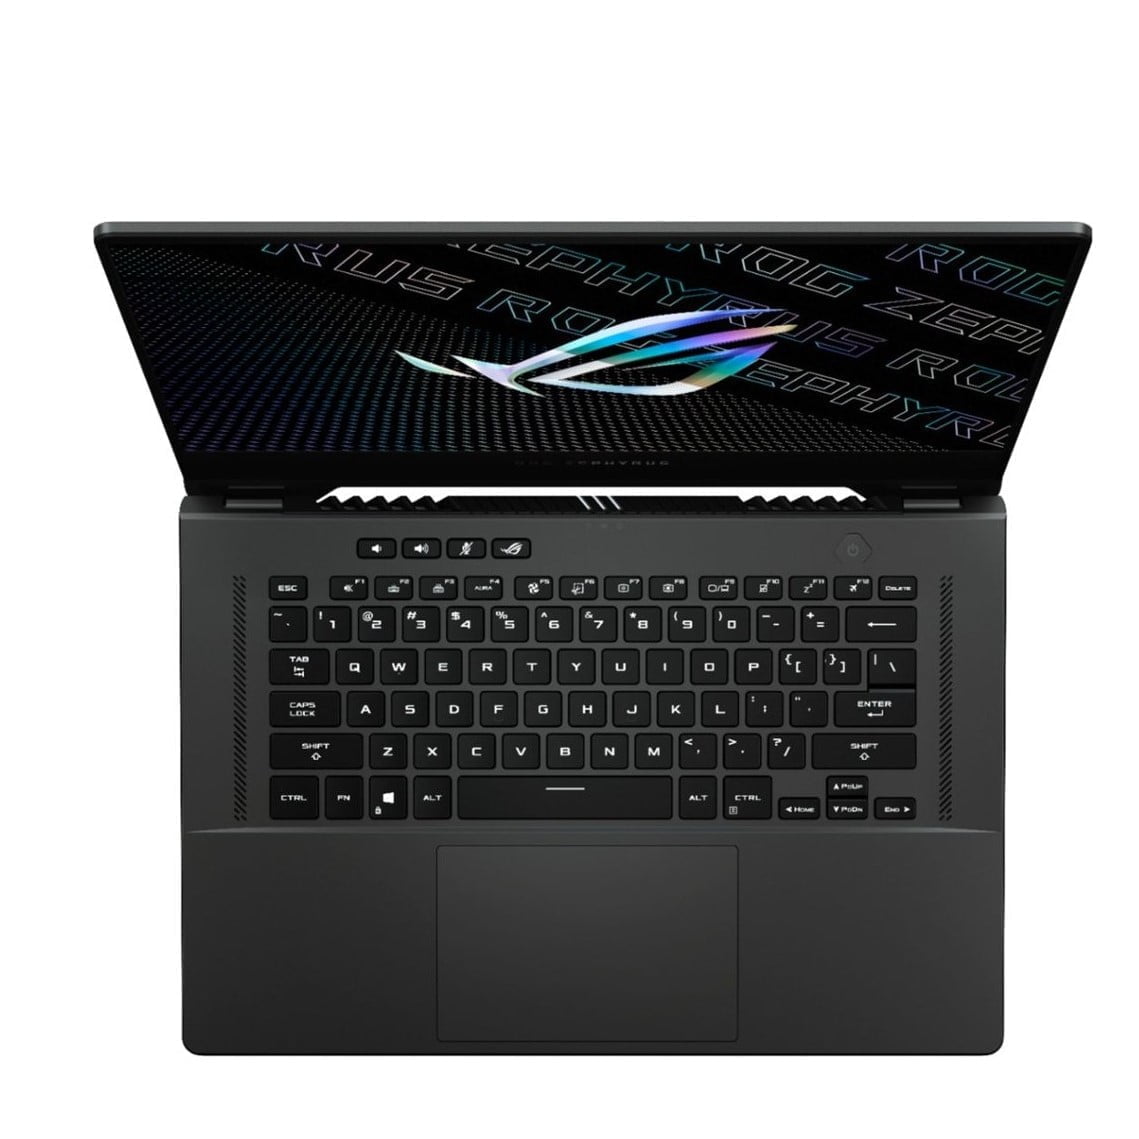 6448848Cv1D Asus &Lt;H1 Class=&Quot;Heading-5 V-Fw-Regular&Quot;&Gt;Asus - Rog Zephyrus 15.6&Quot; Qhd Gaming Laptop - Amd Ryzen 9 - 16Gb Memory - Nvidia Geforce Rtx 3070 - 1Tb Ssd - Eclipse Grey&Lt;/H1&Gt;&Lt;P&Gt;Asus Rog Zephyrus Gaming Laptop. Enjoy Everyday Gaming With This Asus Notebook Pc. The Amd Ryzen 9 Processor And 16Gb Of Ram Let You Run Graphics-Heavy Games Smoothly, While The Potent Nvidia Geforce Rtx 3070 Graphics Produce High-Quality Visuals On The Fast 15.6-Inch 165Hz Qhd Display. This Asus Notebook Pc Has 1Td Ssd That Shortens Load Times And Offers Ample Storage.&Lt;/P&Gt; Asus Rog Gaming Laptop Asus - Rog Zephyrus 15.6&Quot; Qhd Gaming Laptop - Amd Ryzen 9 - 16Gb Memory - Nvidia Geforce Rtx 3070 - 1Tb Ssd - Eclipse Grey